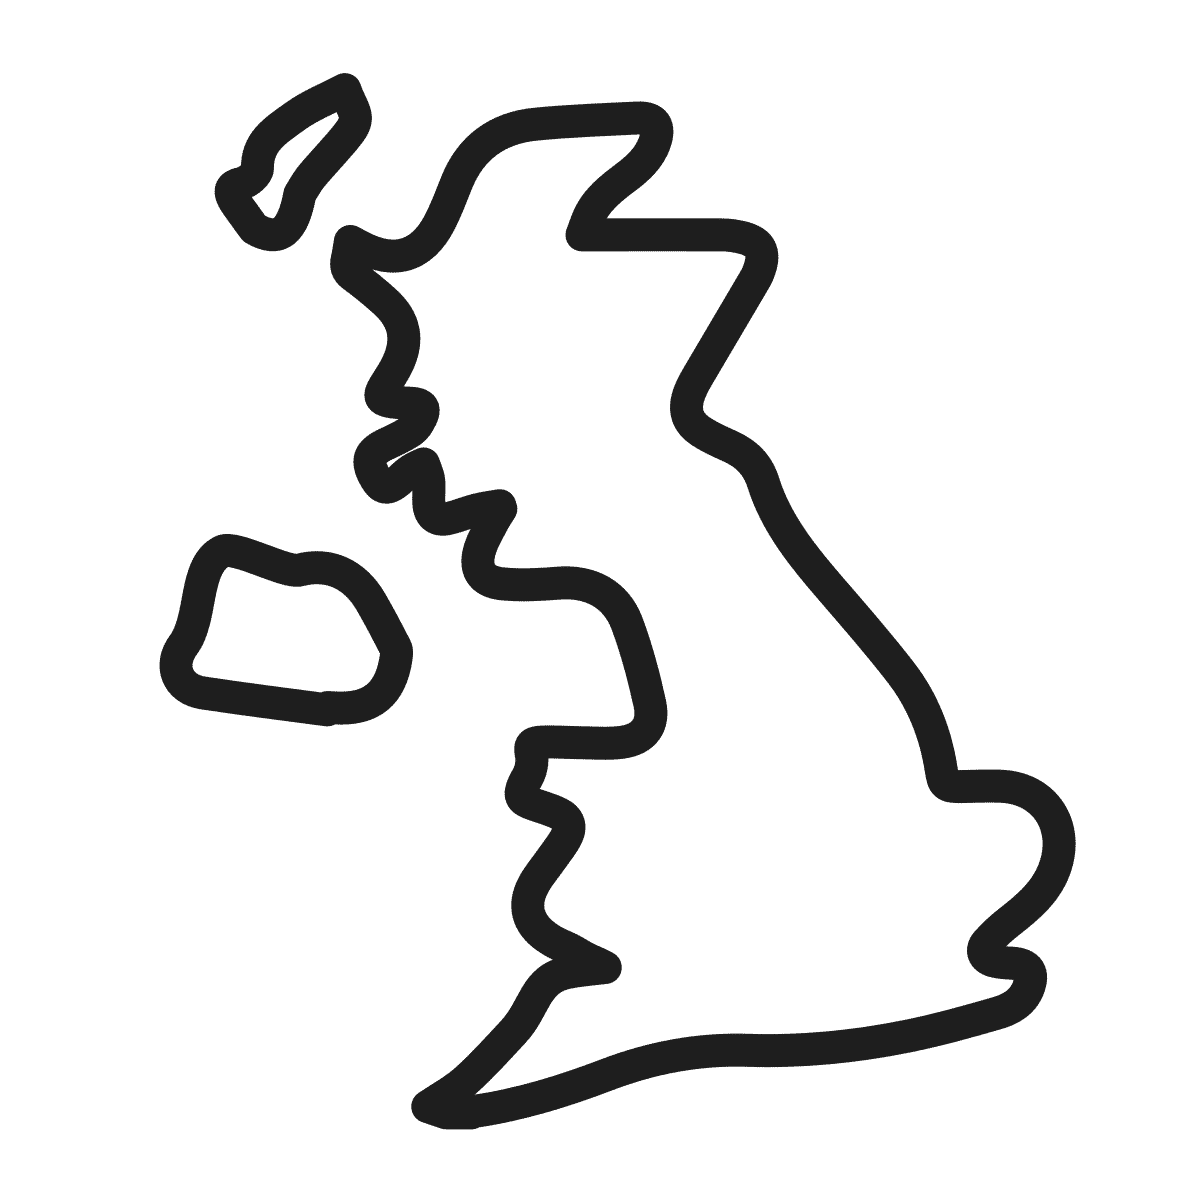 Outline of the UK